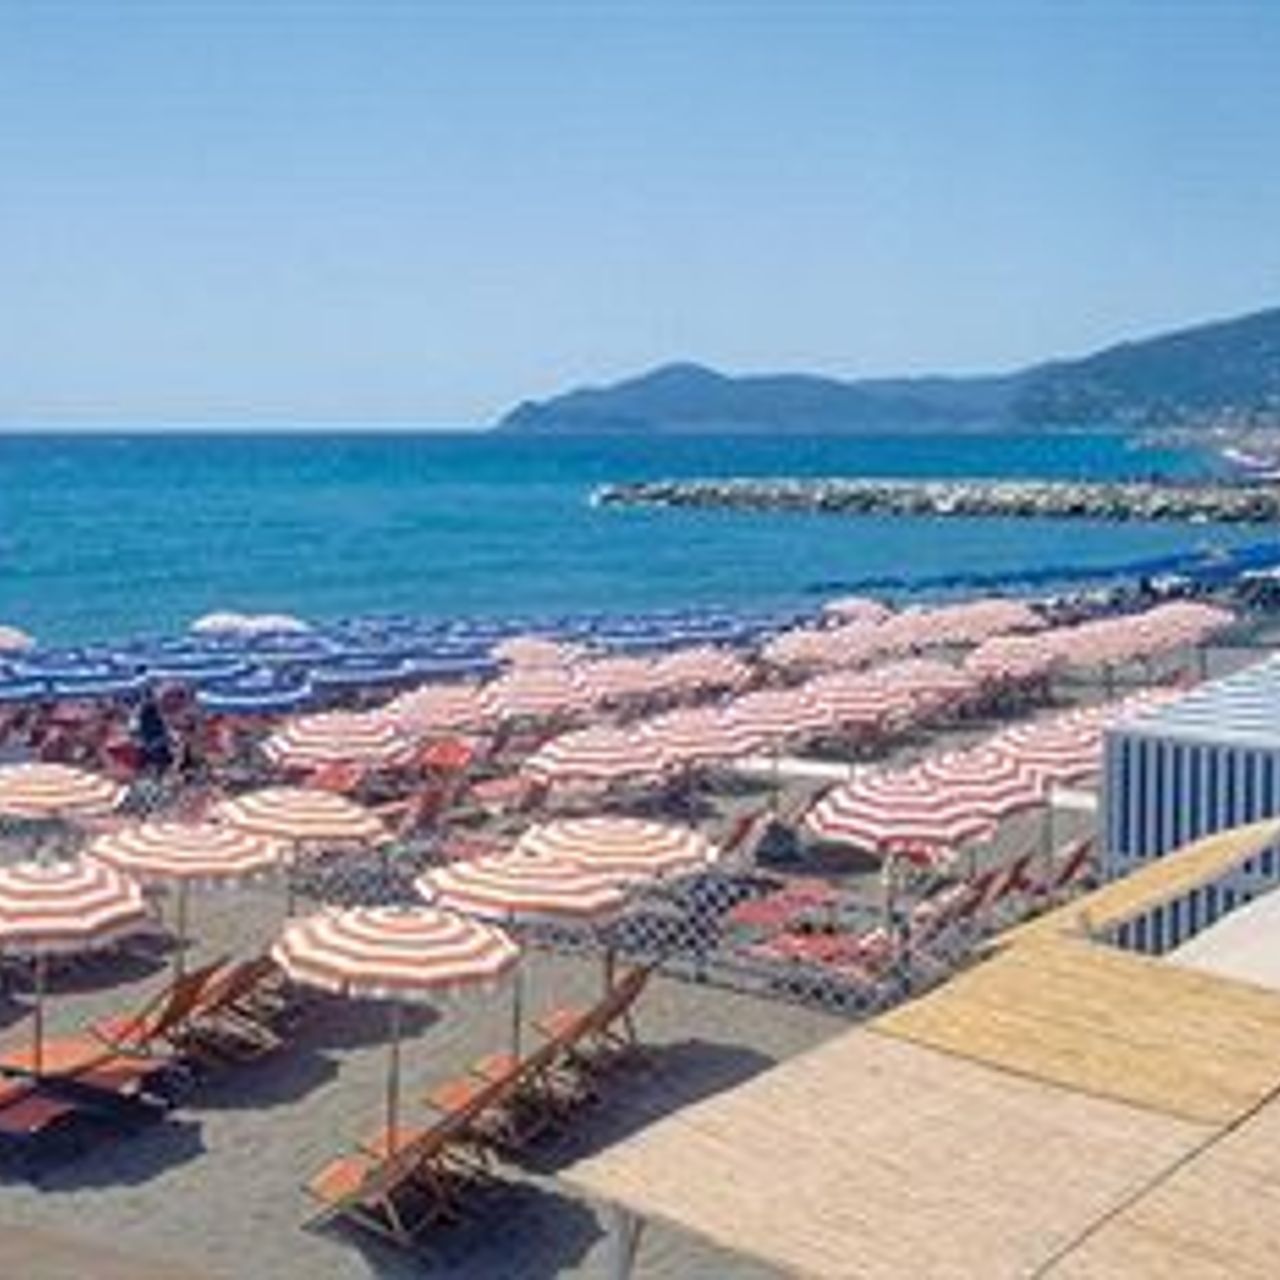 Hotel Bristol - Lavagna - Great prices at HOTEL INFO